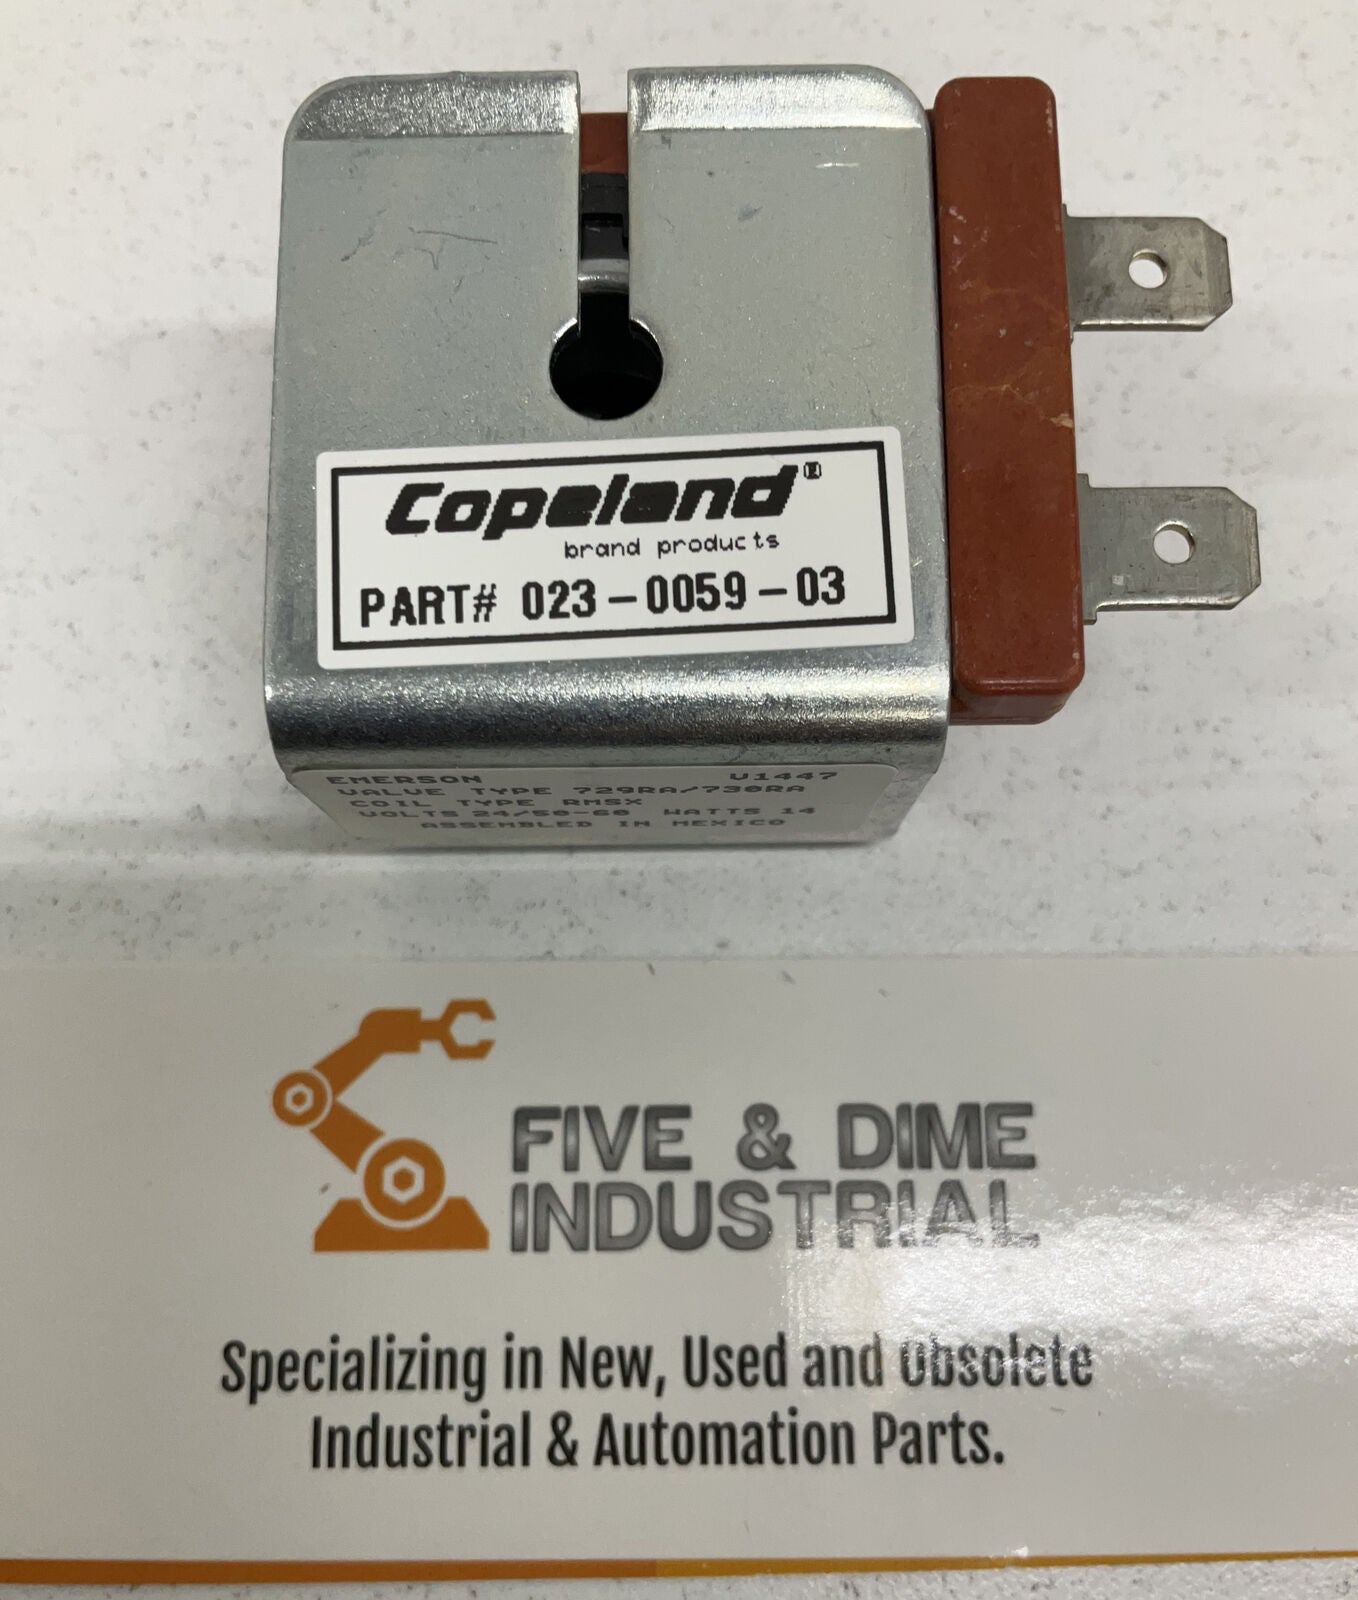 Copeland / Emerson 998-0060-03 New 24V Coil 1/4" Spade Connection (RE115) - 0